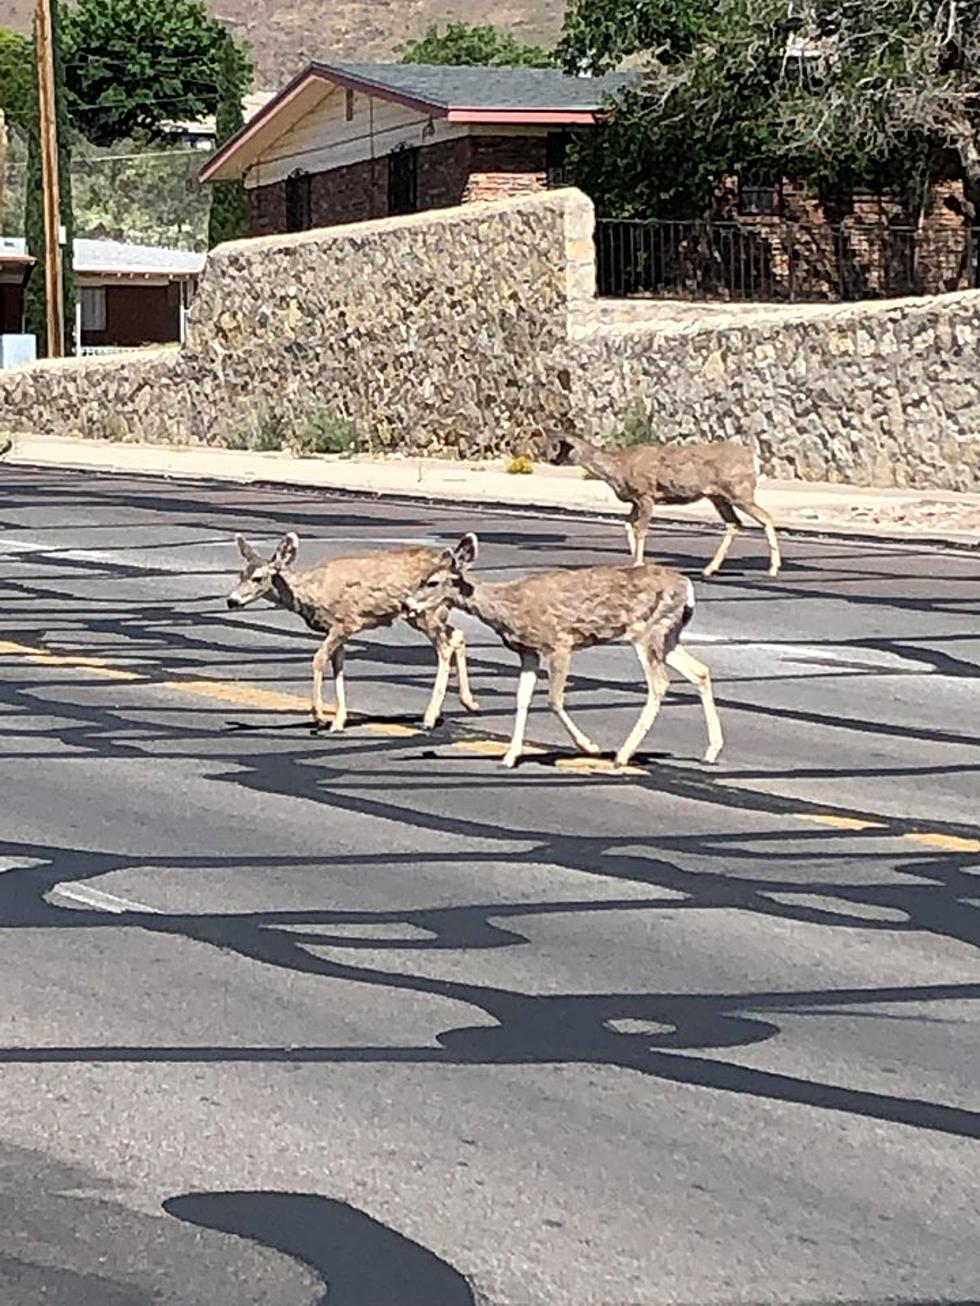 Deer Roam the Streets as El Paso Residents Continue to Stay Home